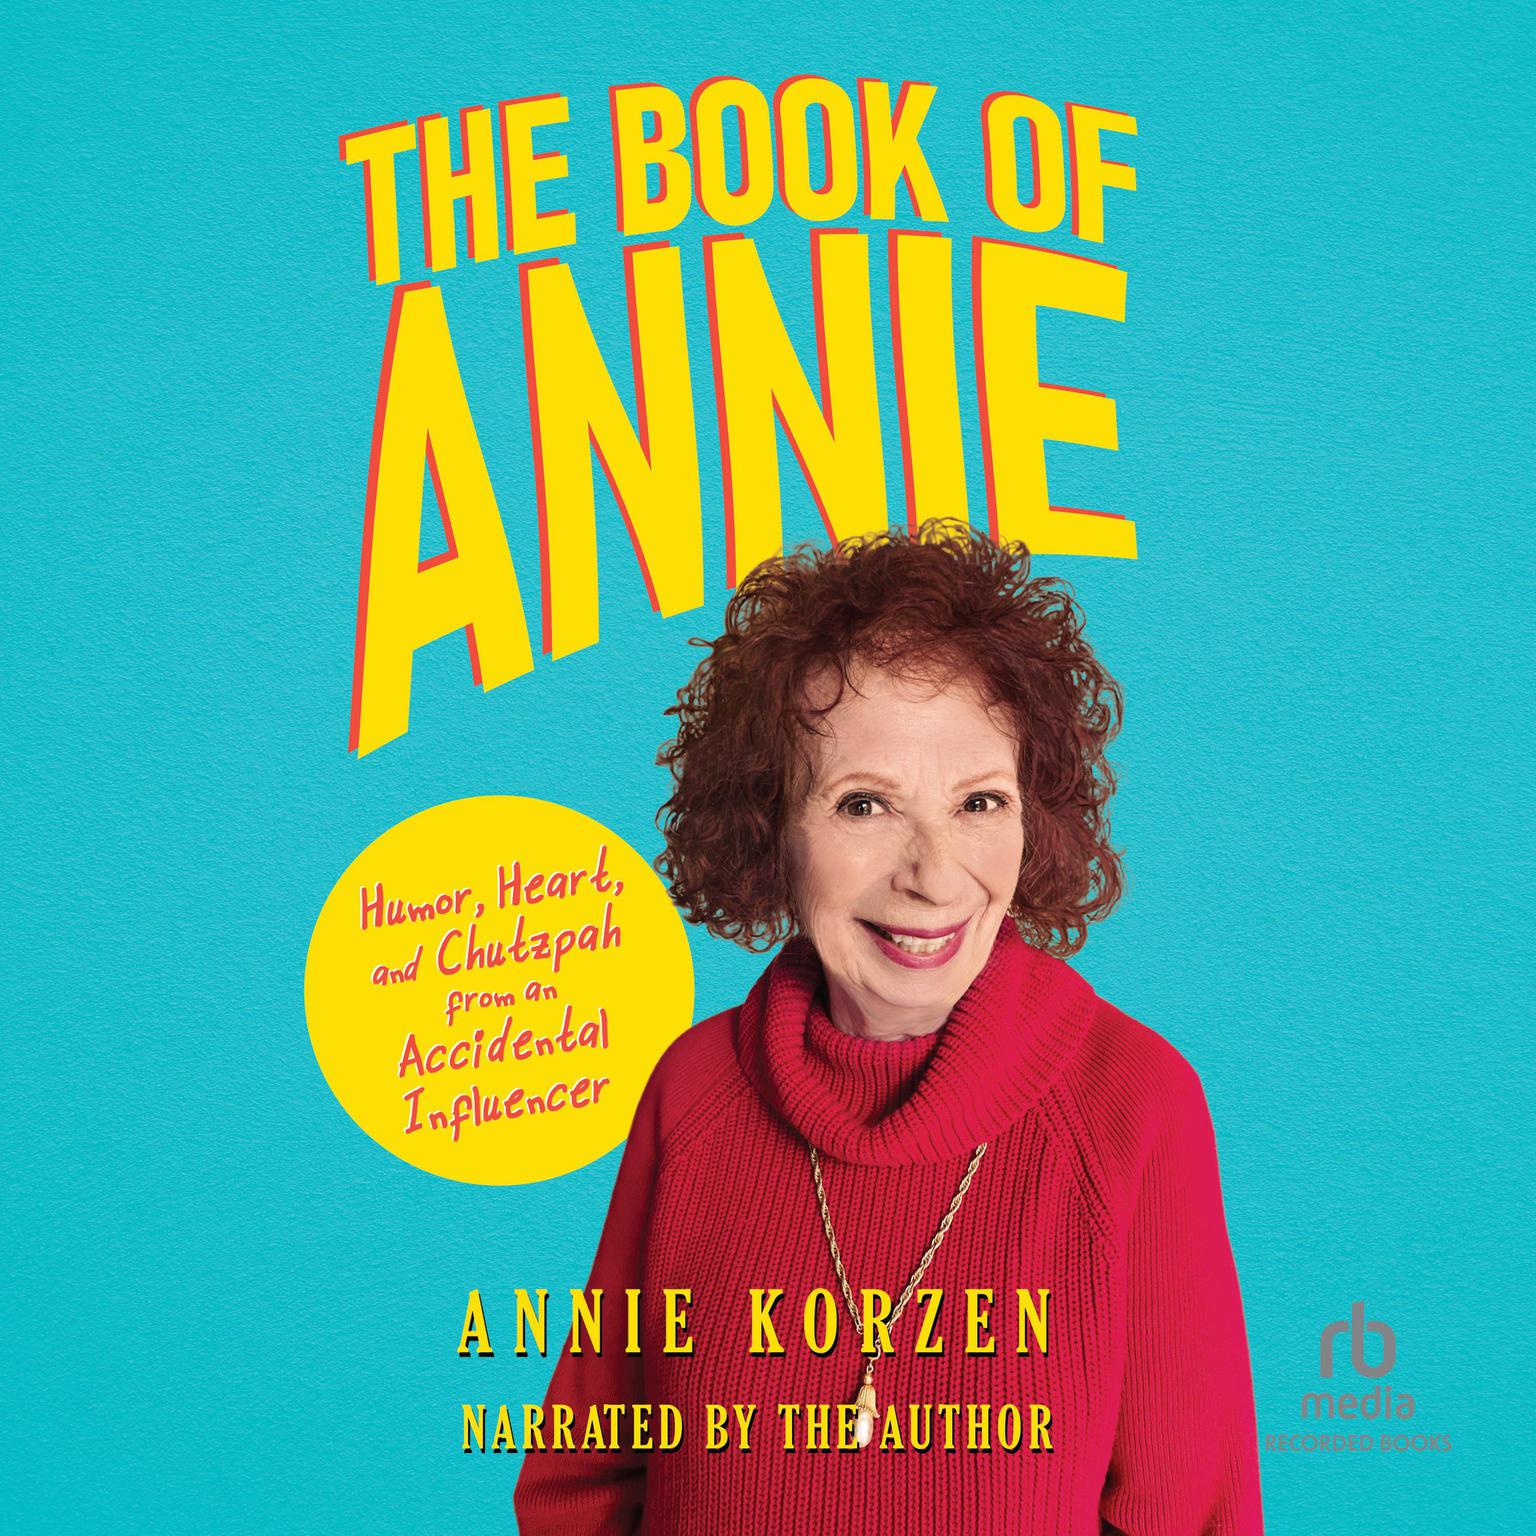 The Book of Annie: Humor, Heart, and Chutzpah from an Accidental Influencer Audiobook, by Annie Korzen